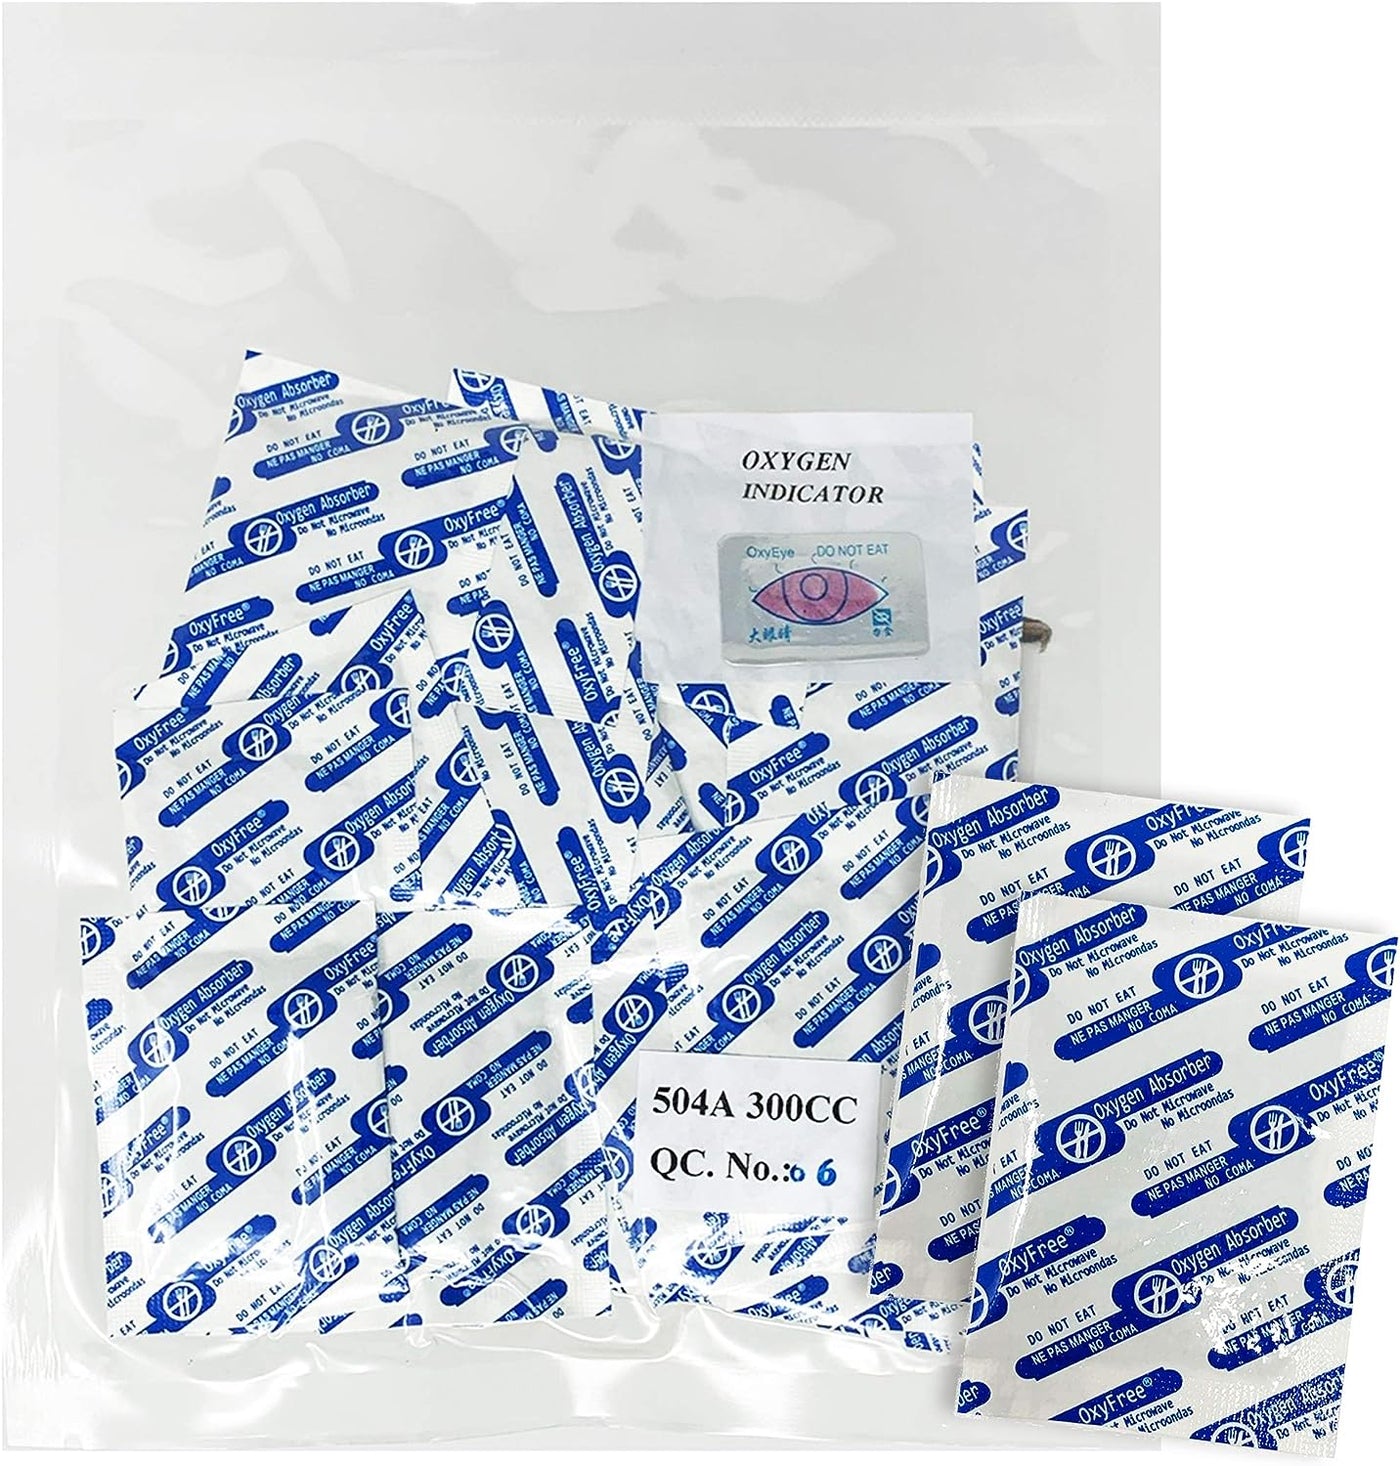 300 cc Oxygen Absorbers-50 count